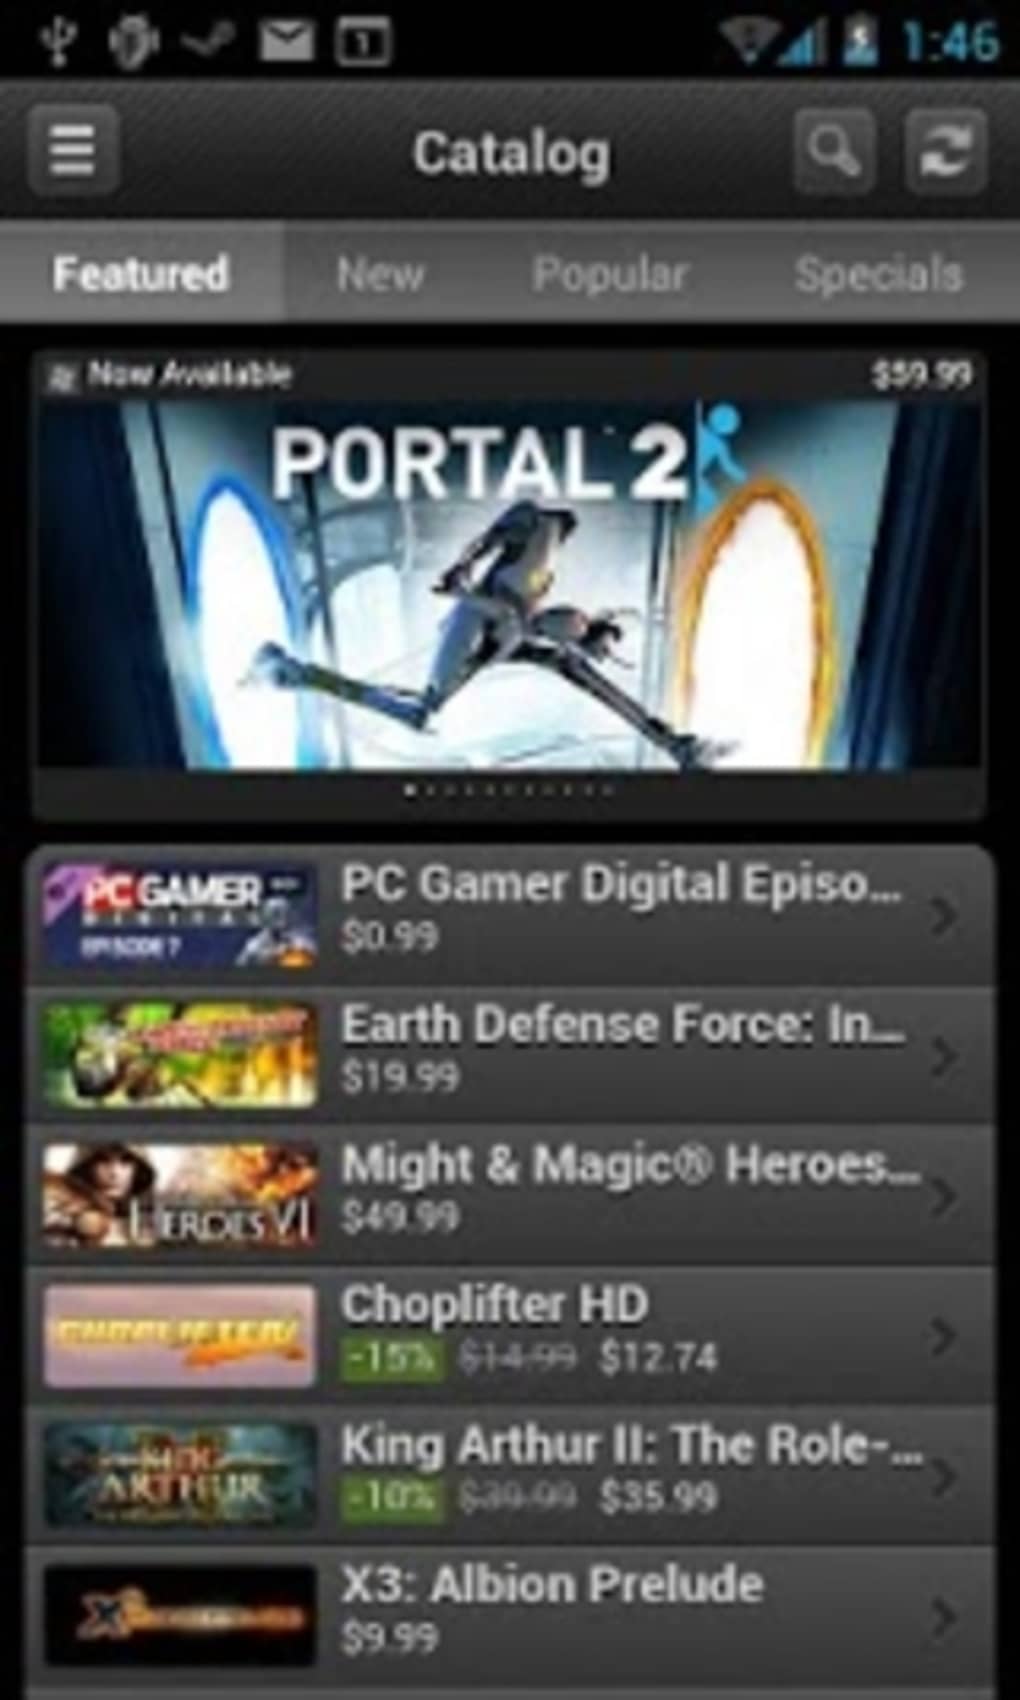 Download Steam free for PC, Mac, iOS, Android APK - CCM